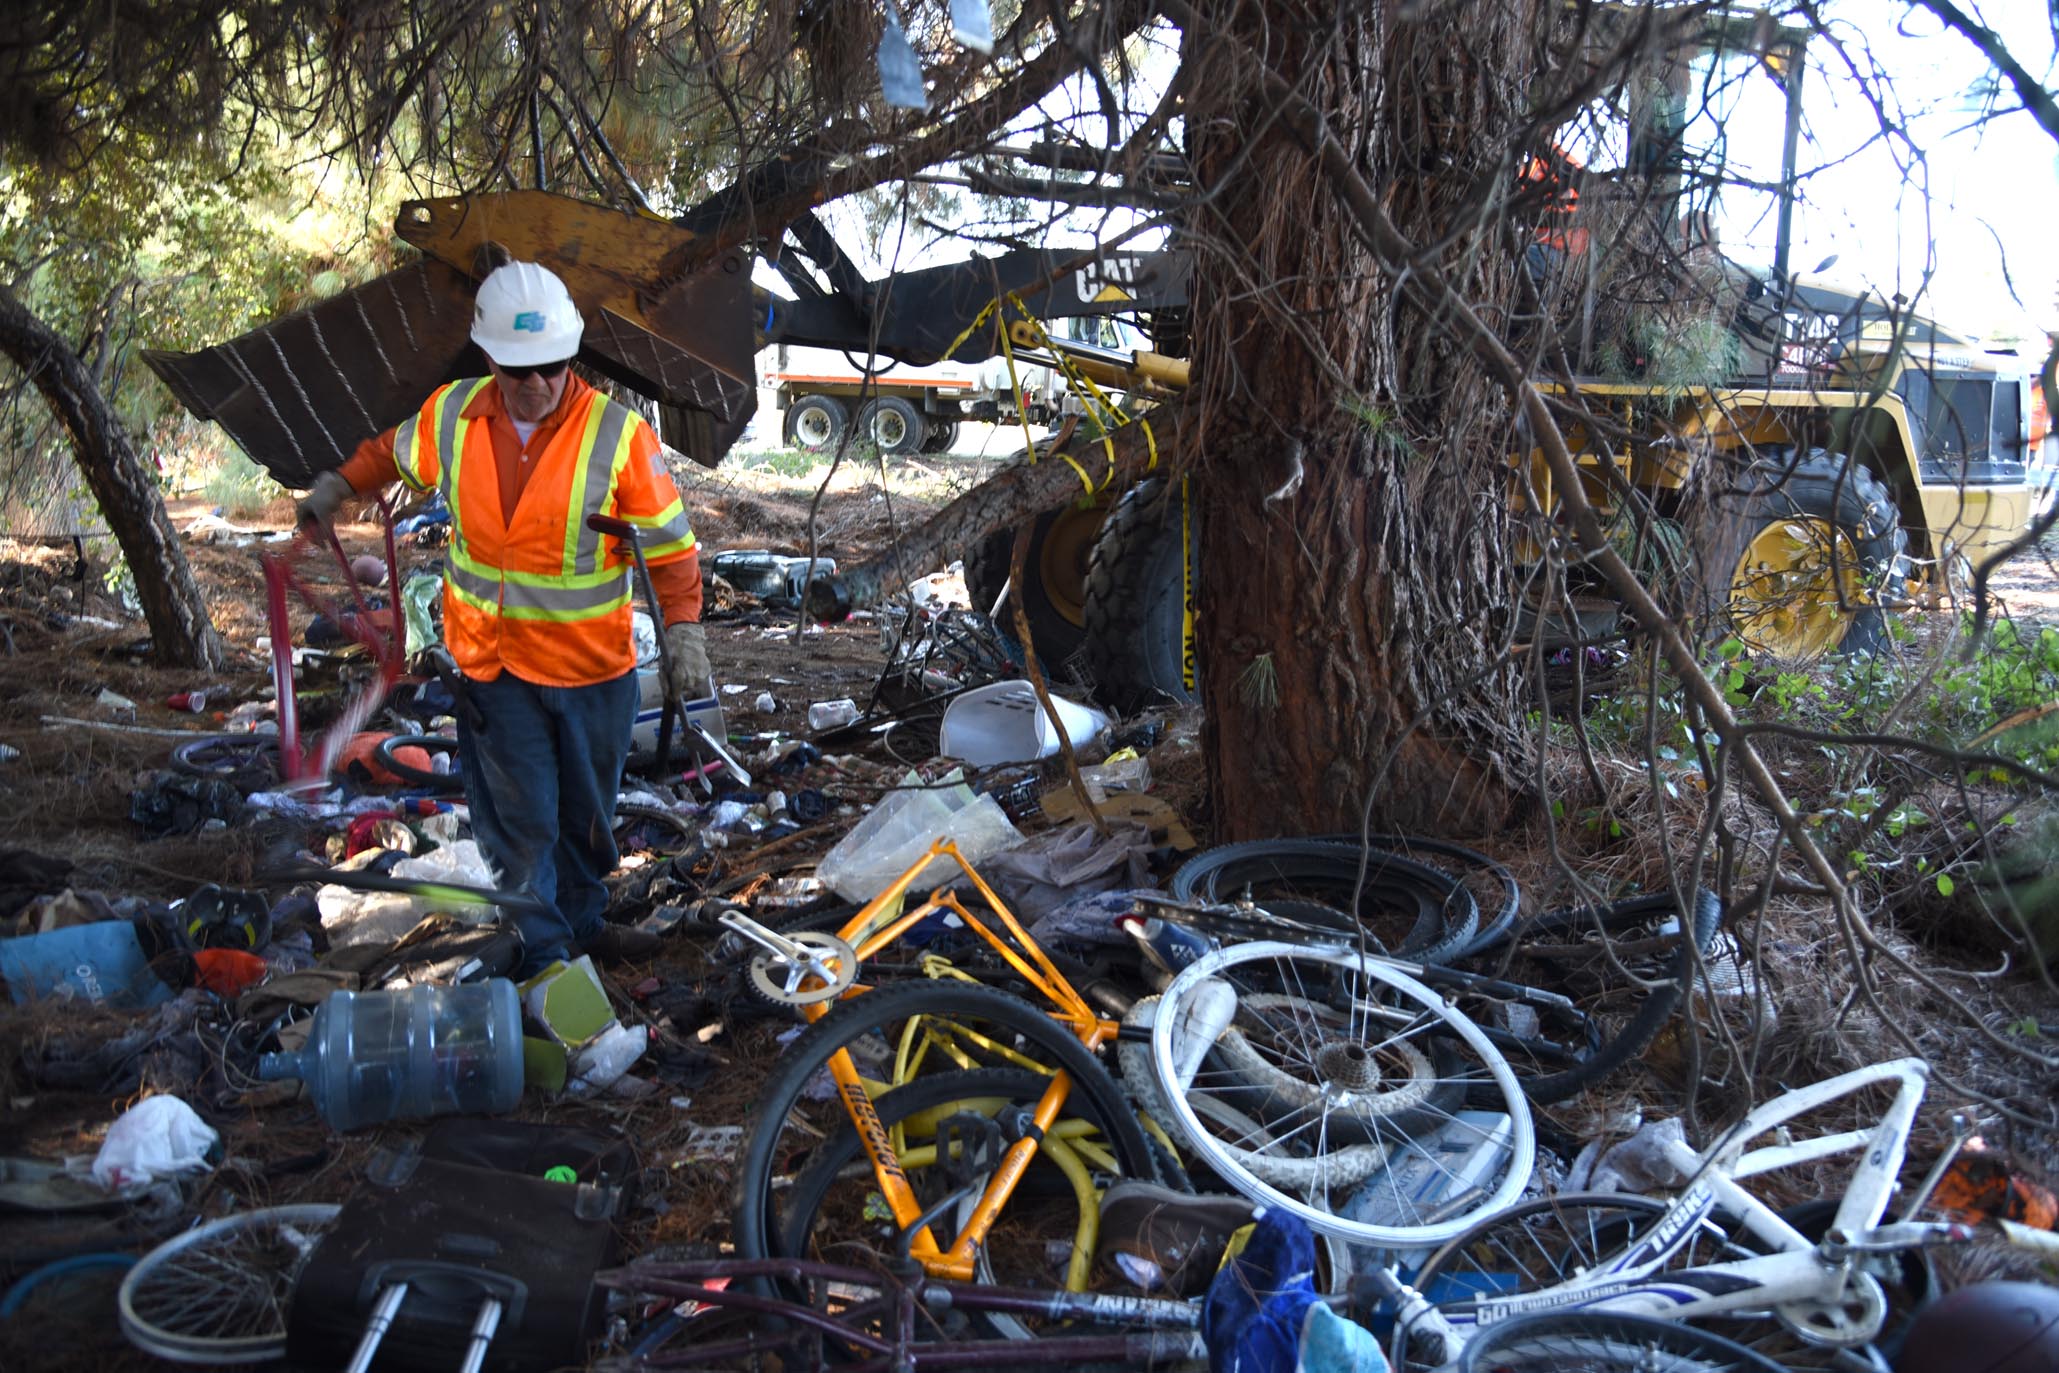 BIke theft at homeless camps